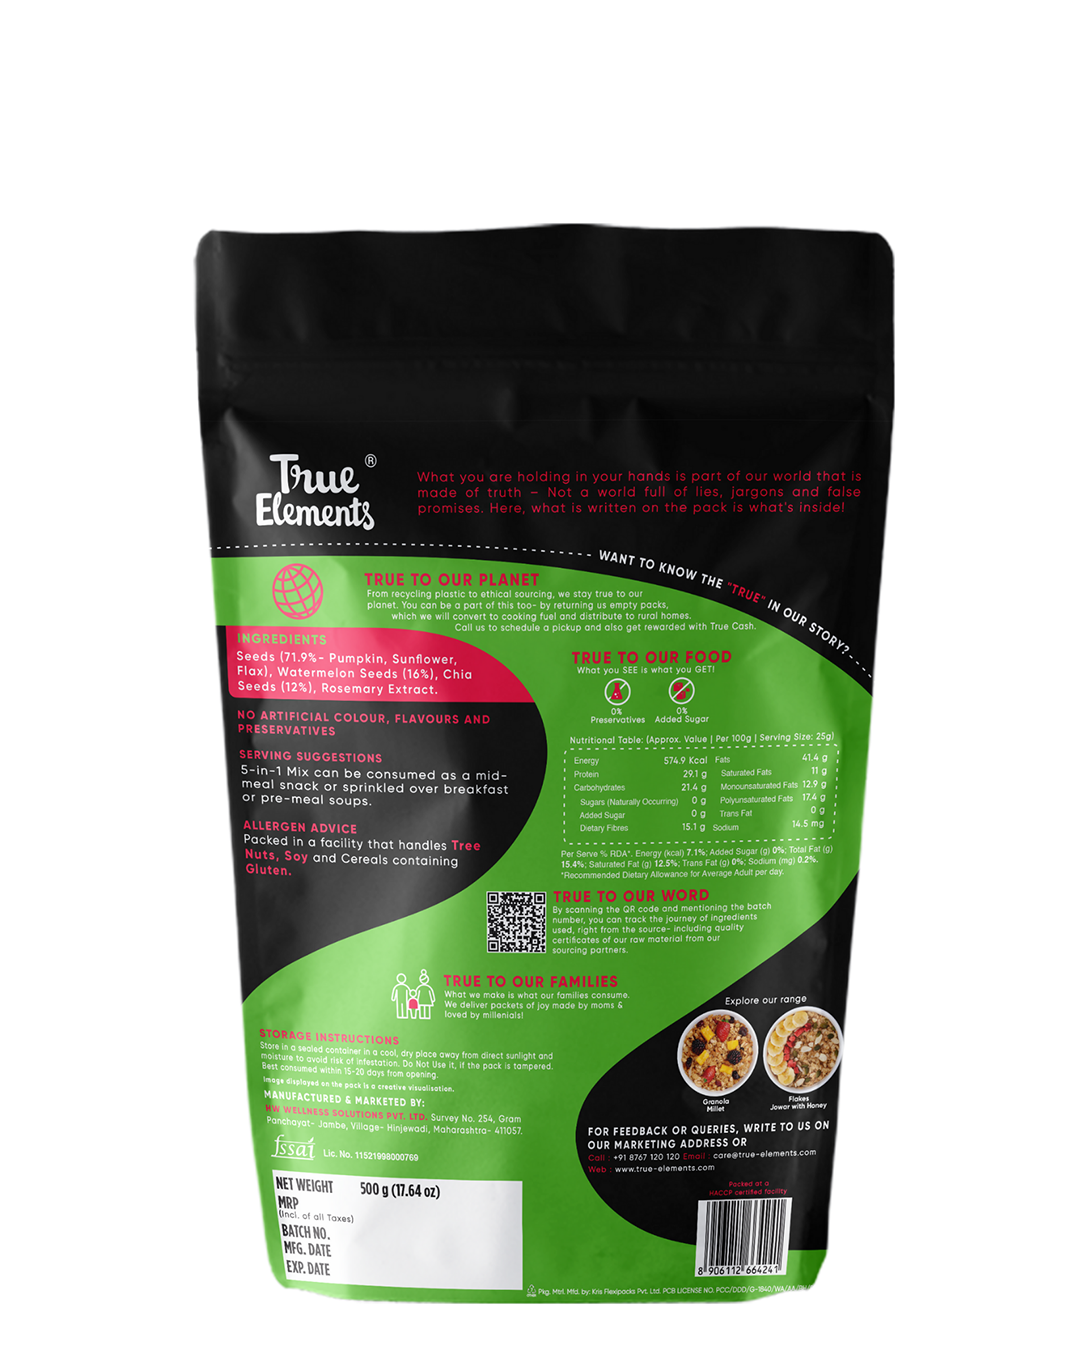 True elements 5 in 1 mix 500gm pack ingredients and nutrients